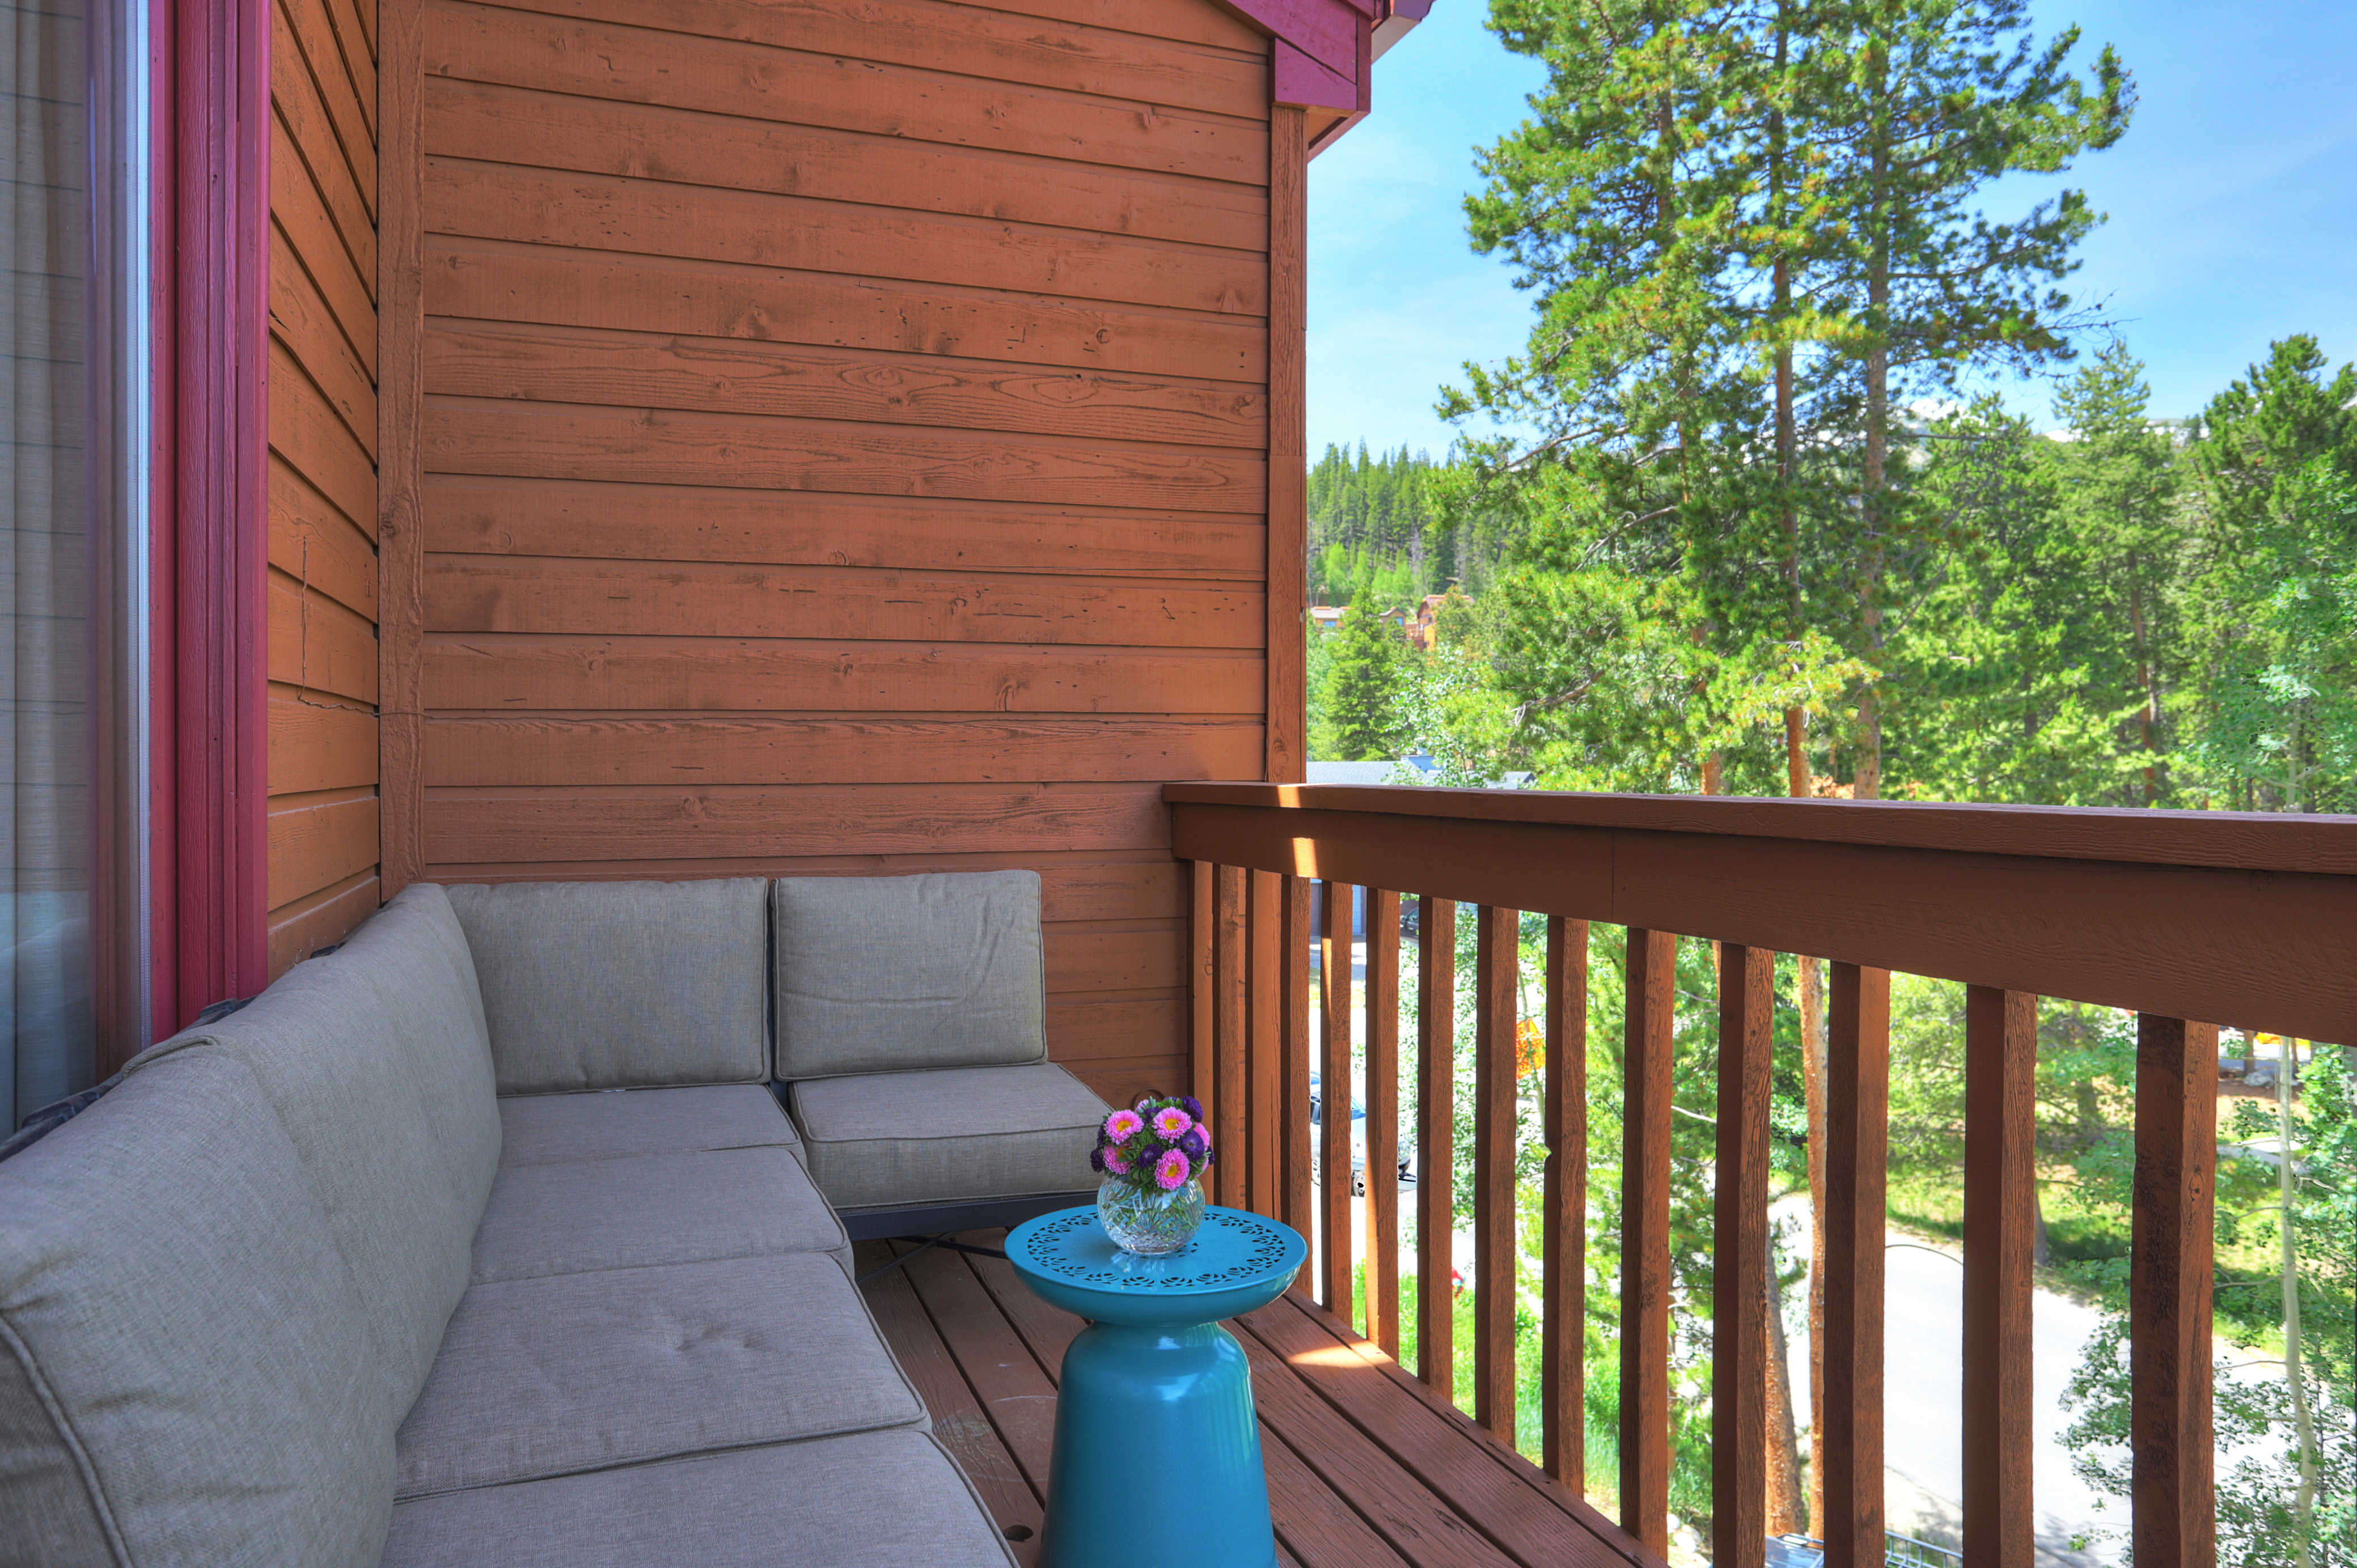 This home has many outdoor decks and seating areas to enjoy the mountain air.